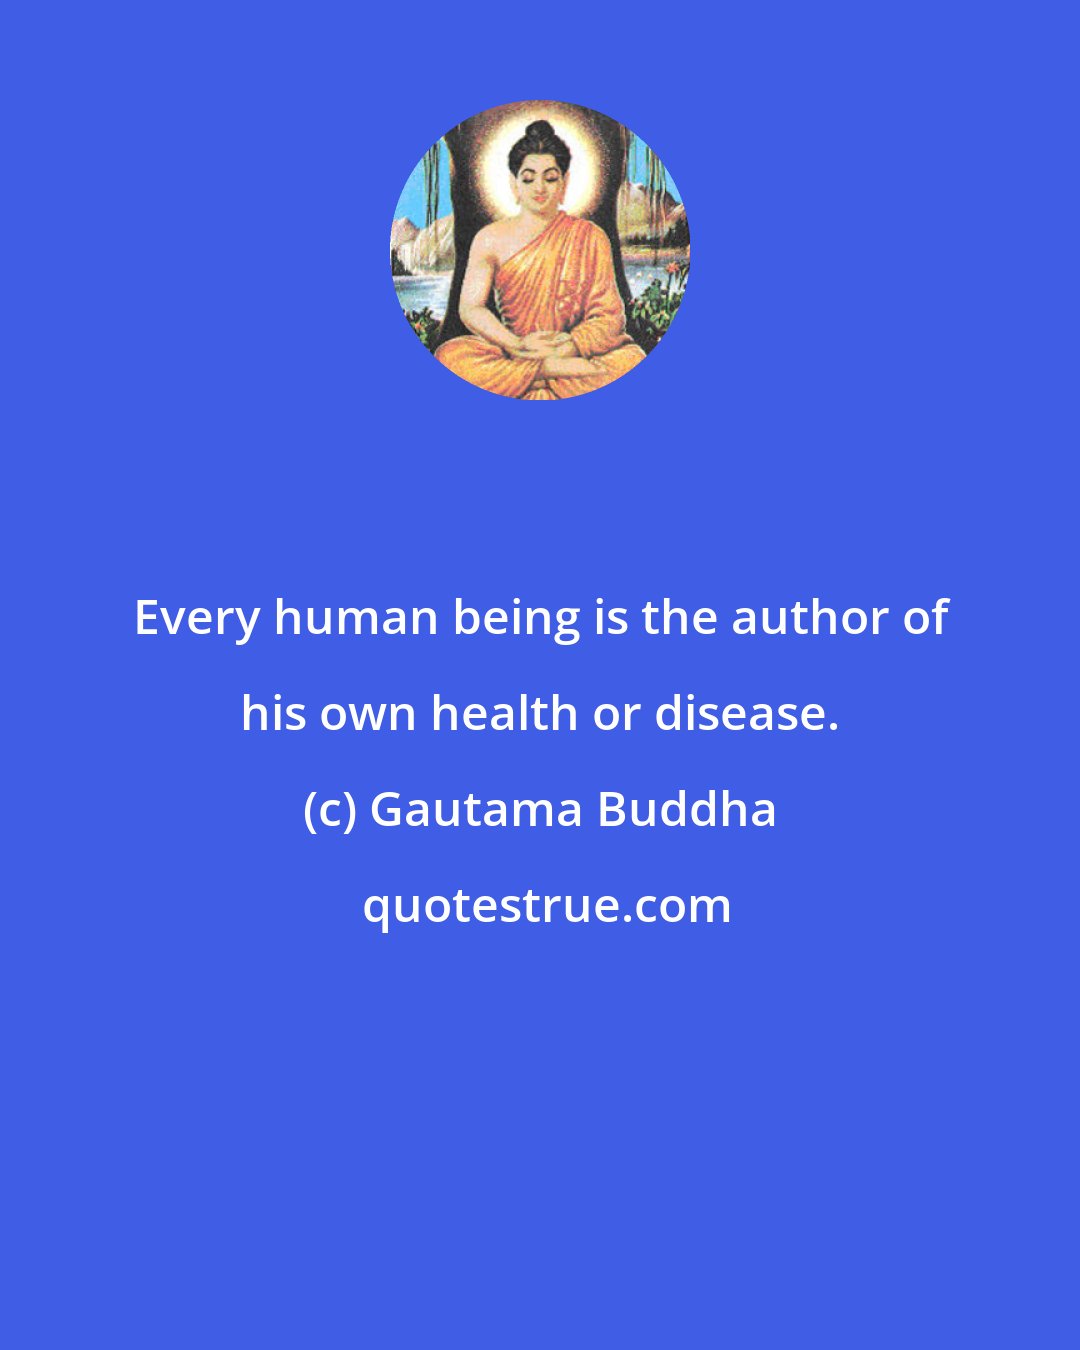 Gautama Buddha: Every human being is the author of his own health or disease.